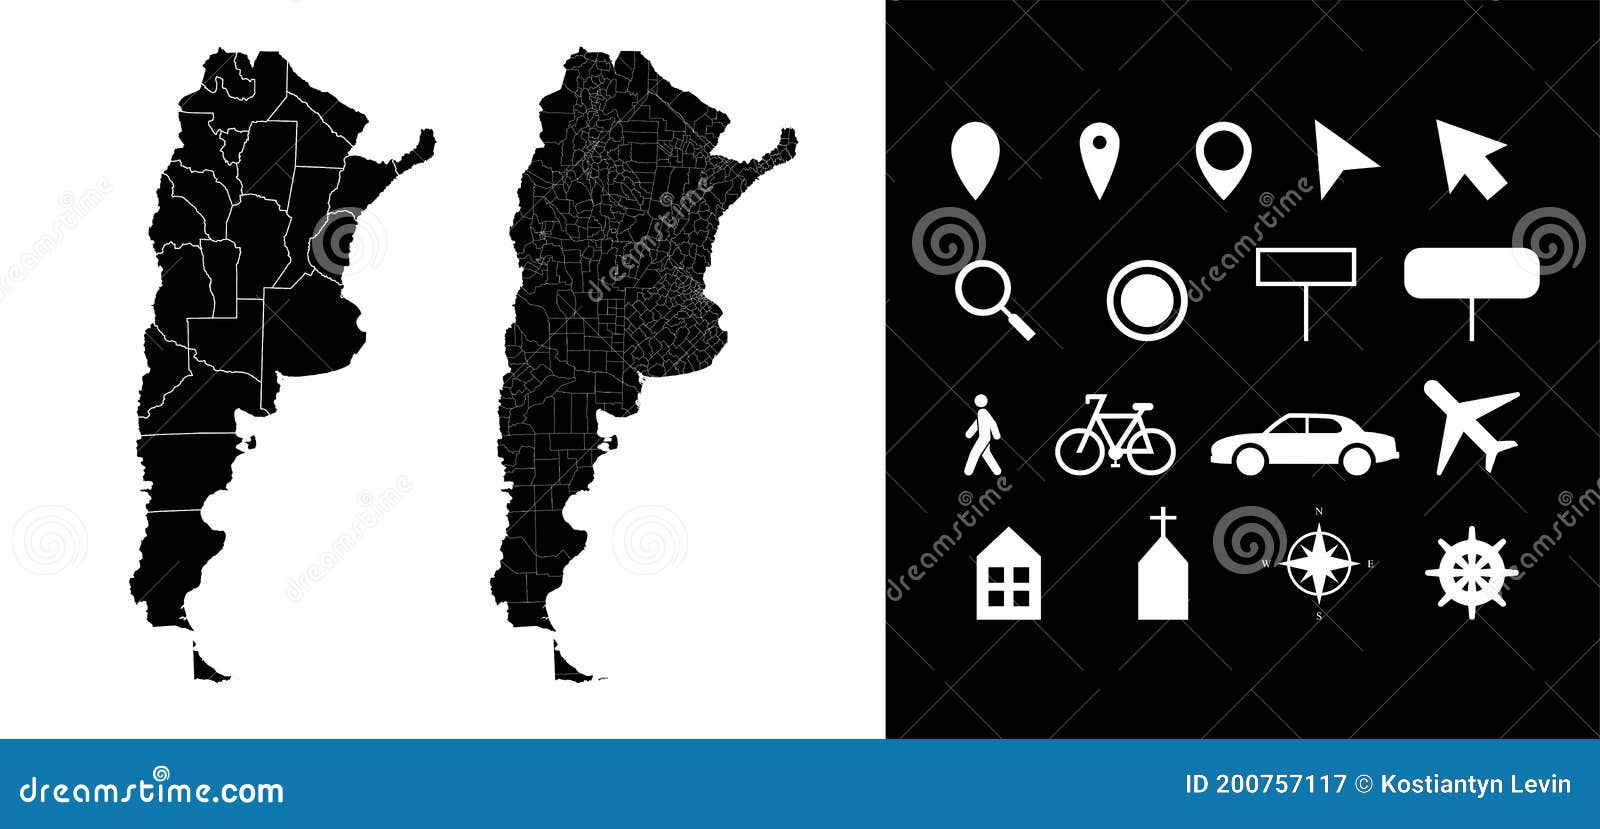 map of argentina administrative regions departments, icons. map location pin, arrow, man, bicycle, car, airplane